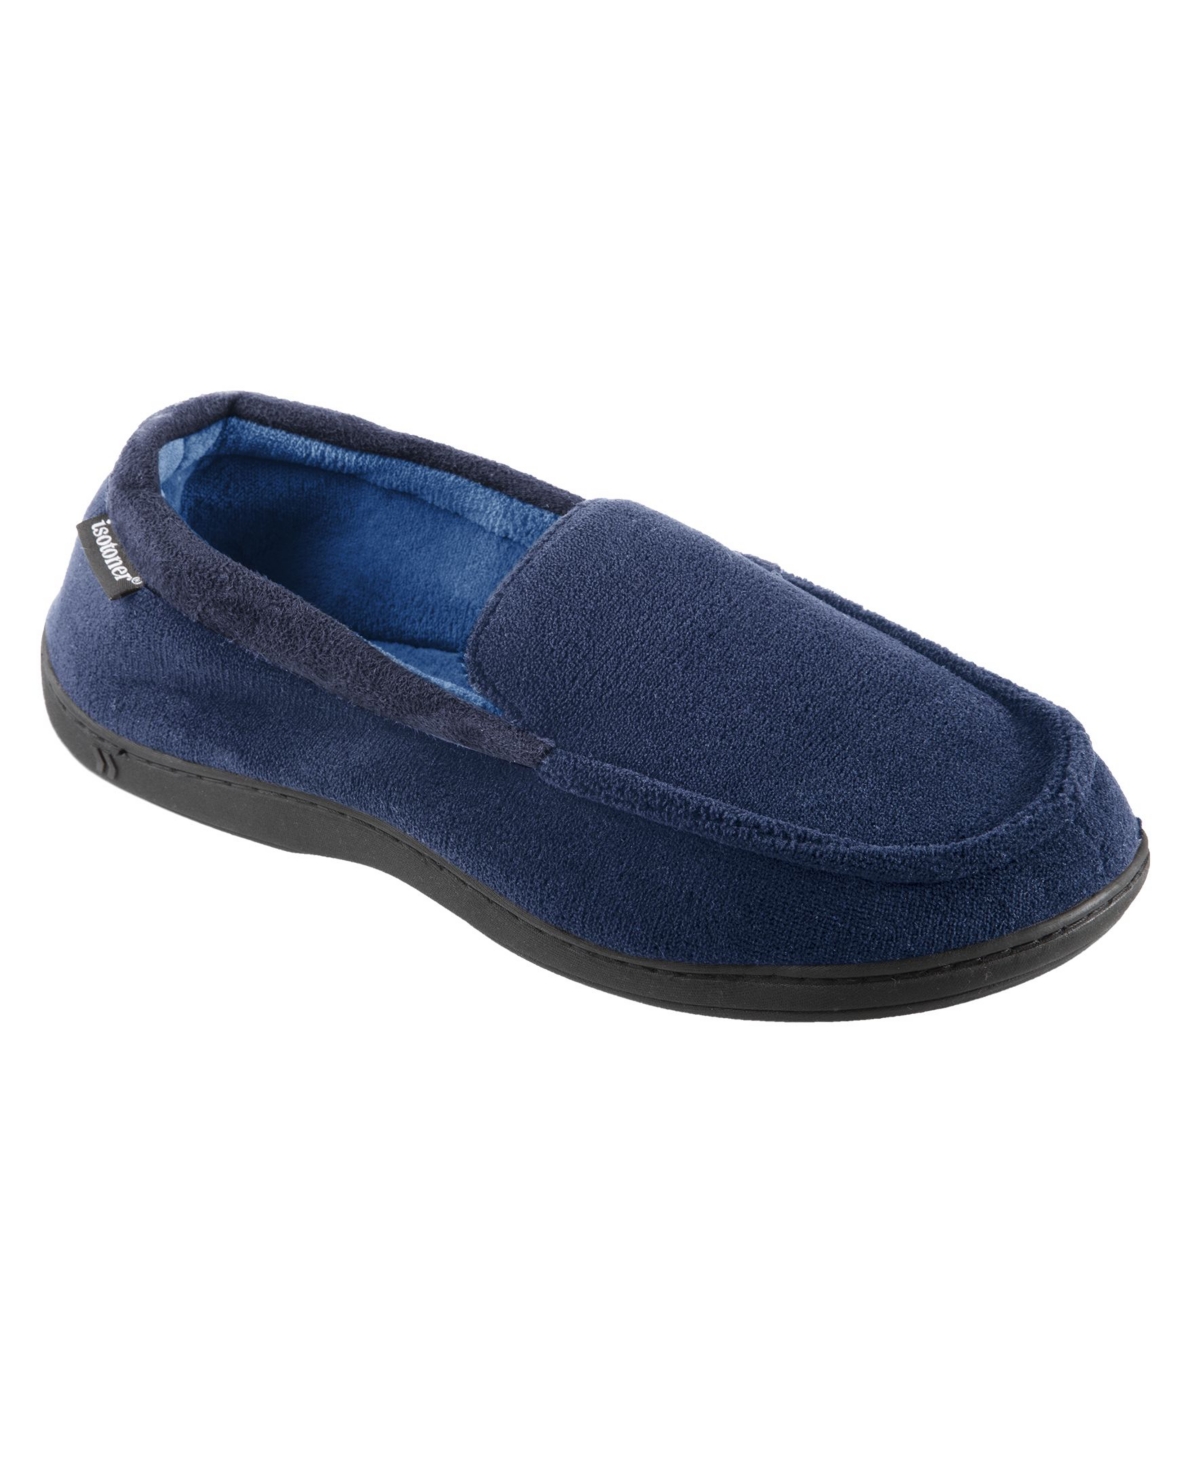 Isotoner Signature Men's Microterry Jared Moccasin Slippers with Memory Foam